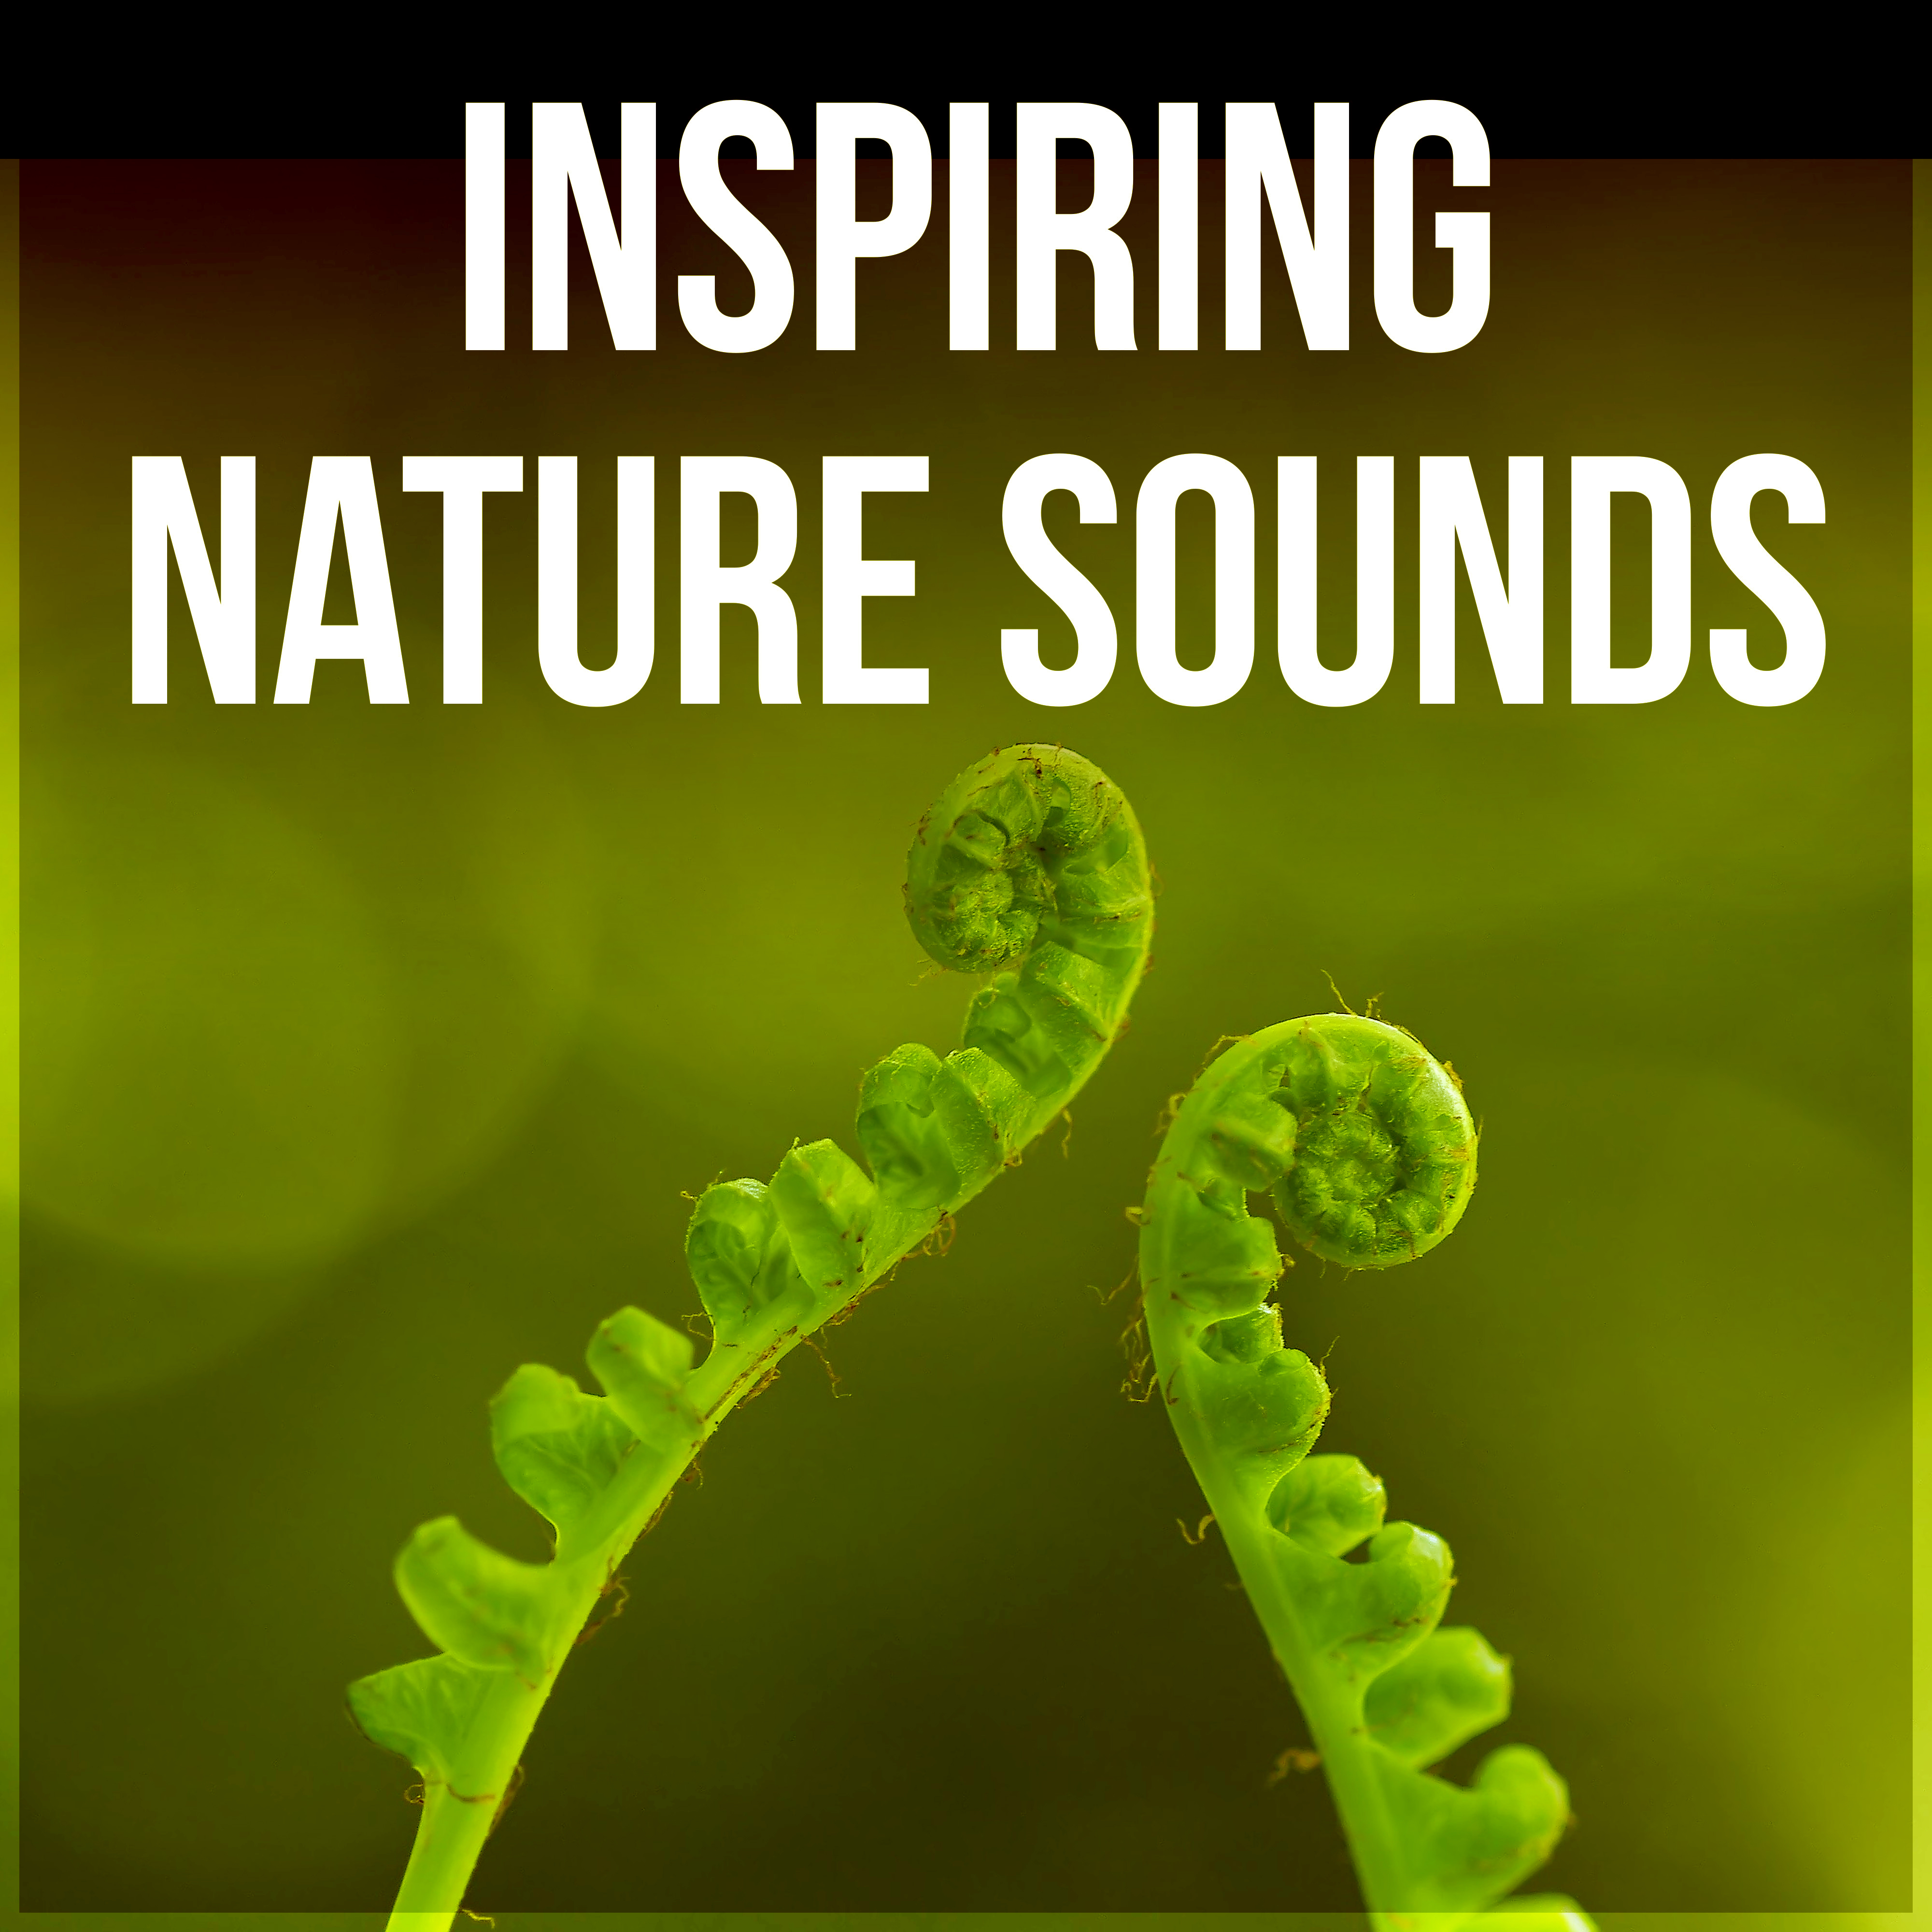 Inspiring Nature Sounds - Relaxing Piano Music Lullabies to Help Relaxation, Background Music for Reading